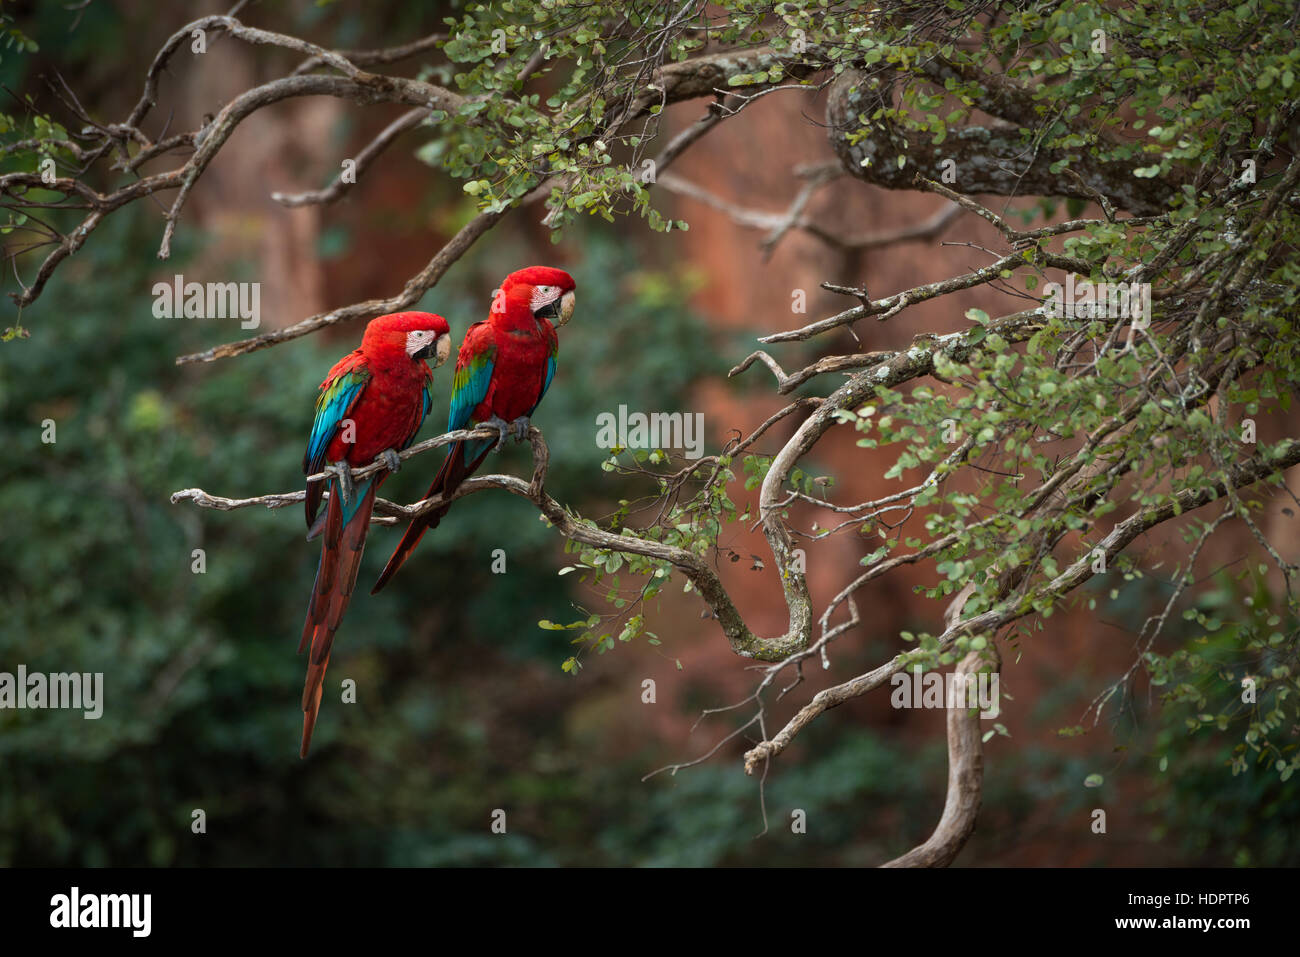 A breeding pair of Red-and-green Macaws perched on a tree with sandstone cliffs in the background Stock Photo